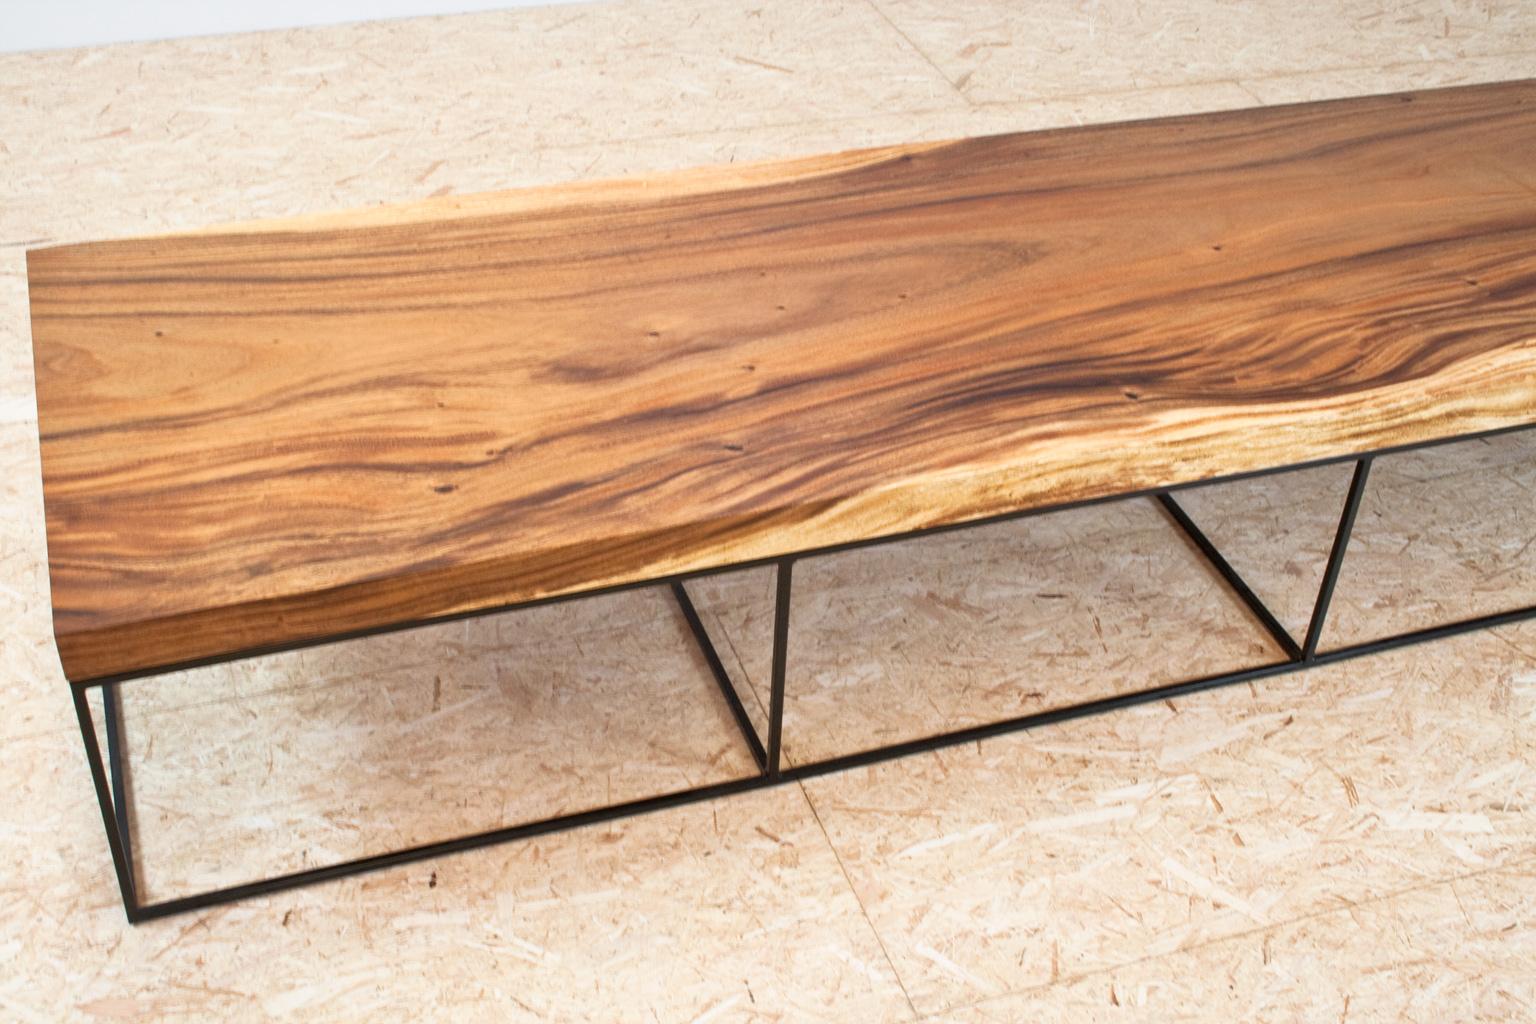 Wood Large Contemporary Coffee Table in Suar and Black Metal, Dutch Modern Design